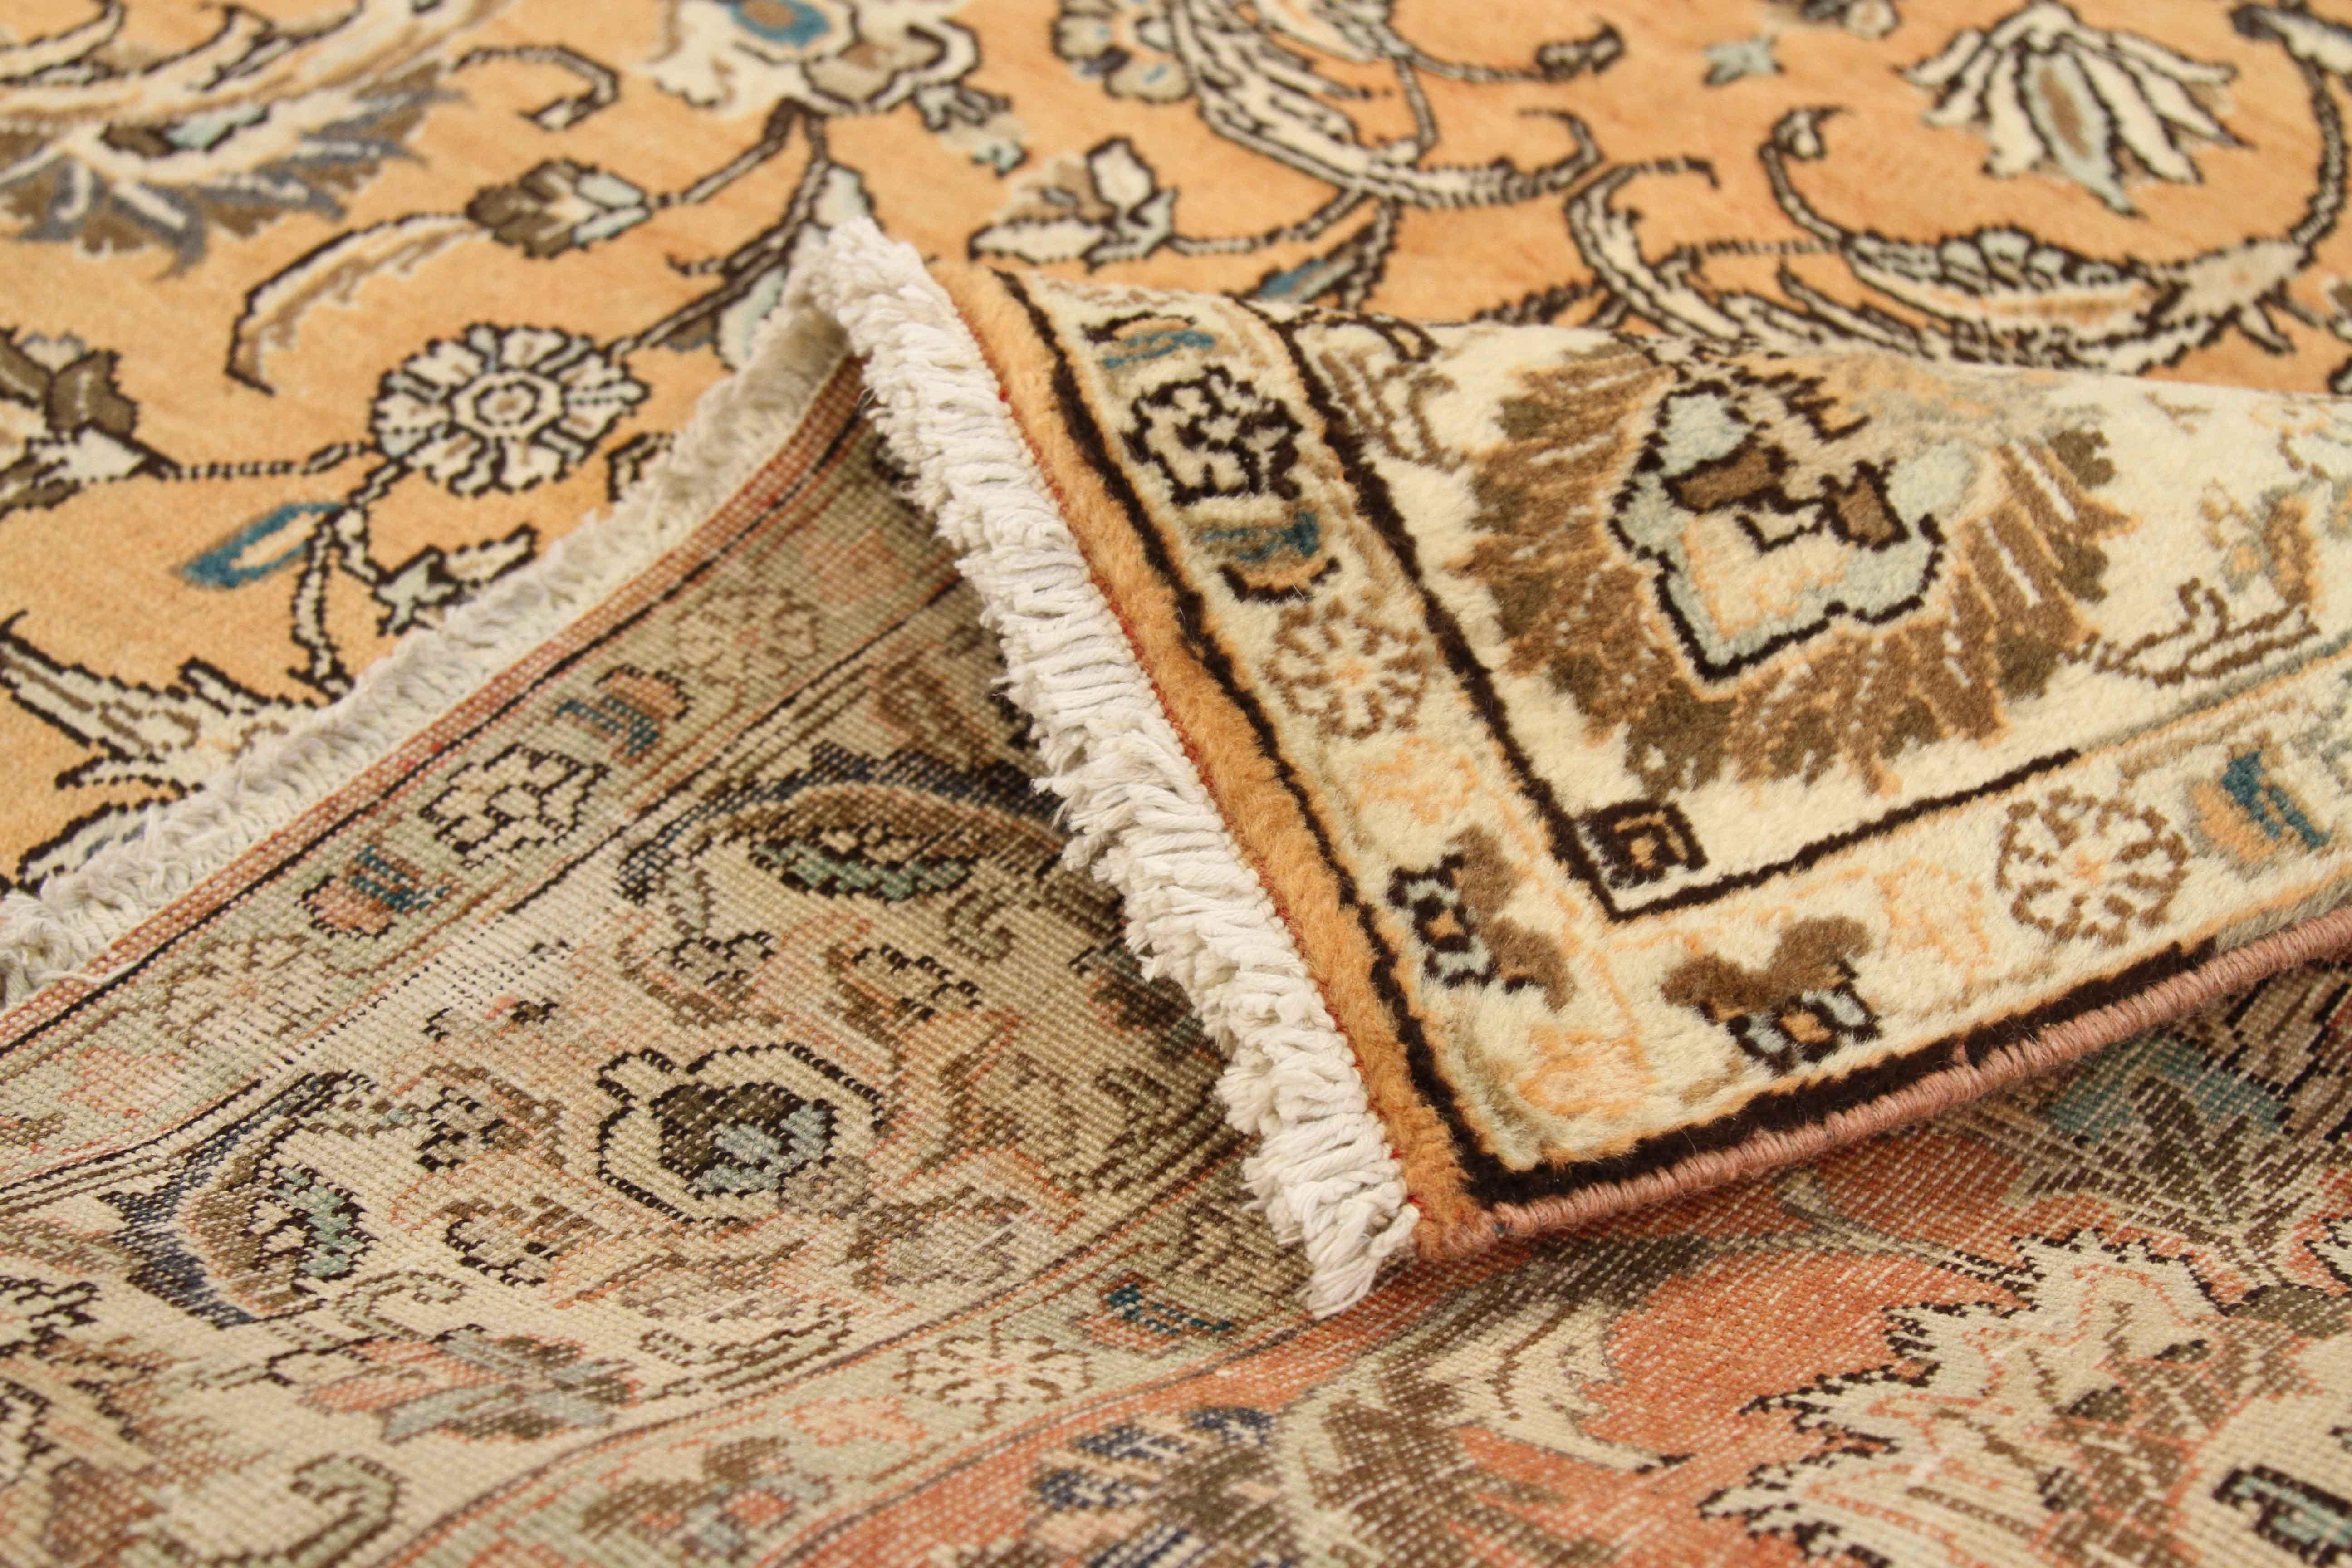 Antique Persian rug handwoven from the finest sheep’s wool and colored with all-natural vegetable dyes that are safe for humans and pets. It’s a traditional Tabriz weaving featuring a lovely ensemble of floral designs in brown and ivory over an